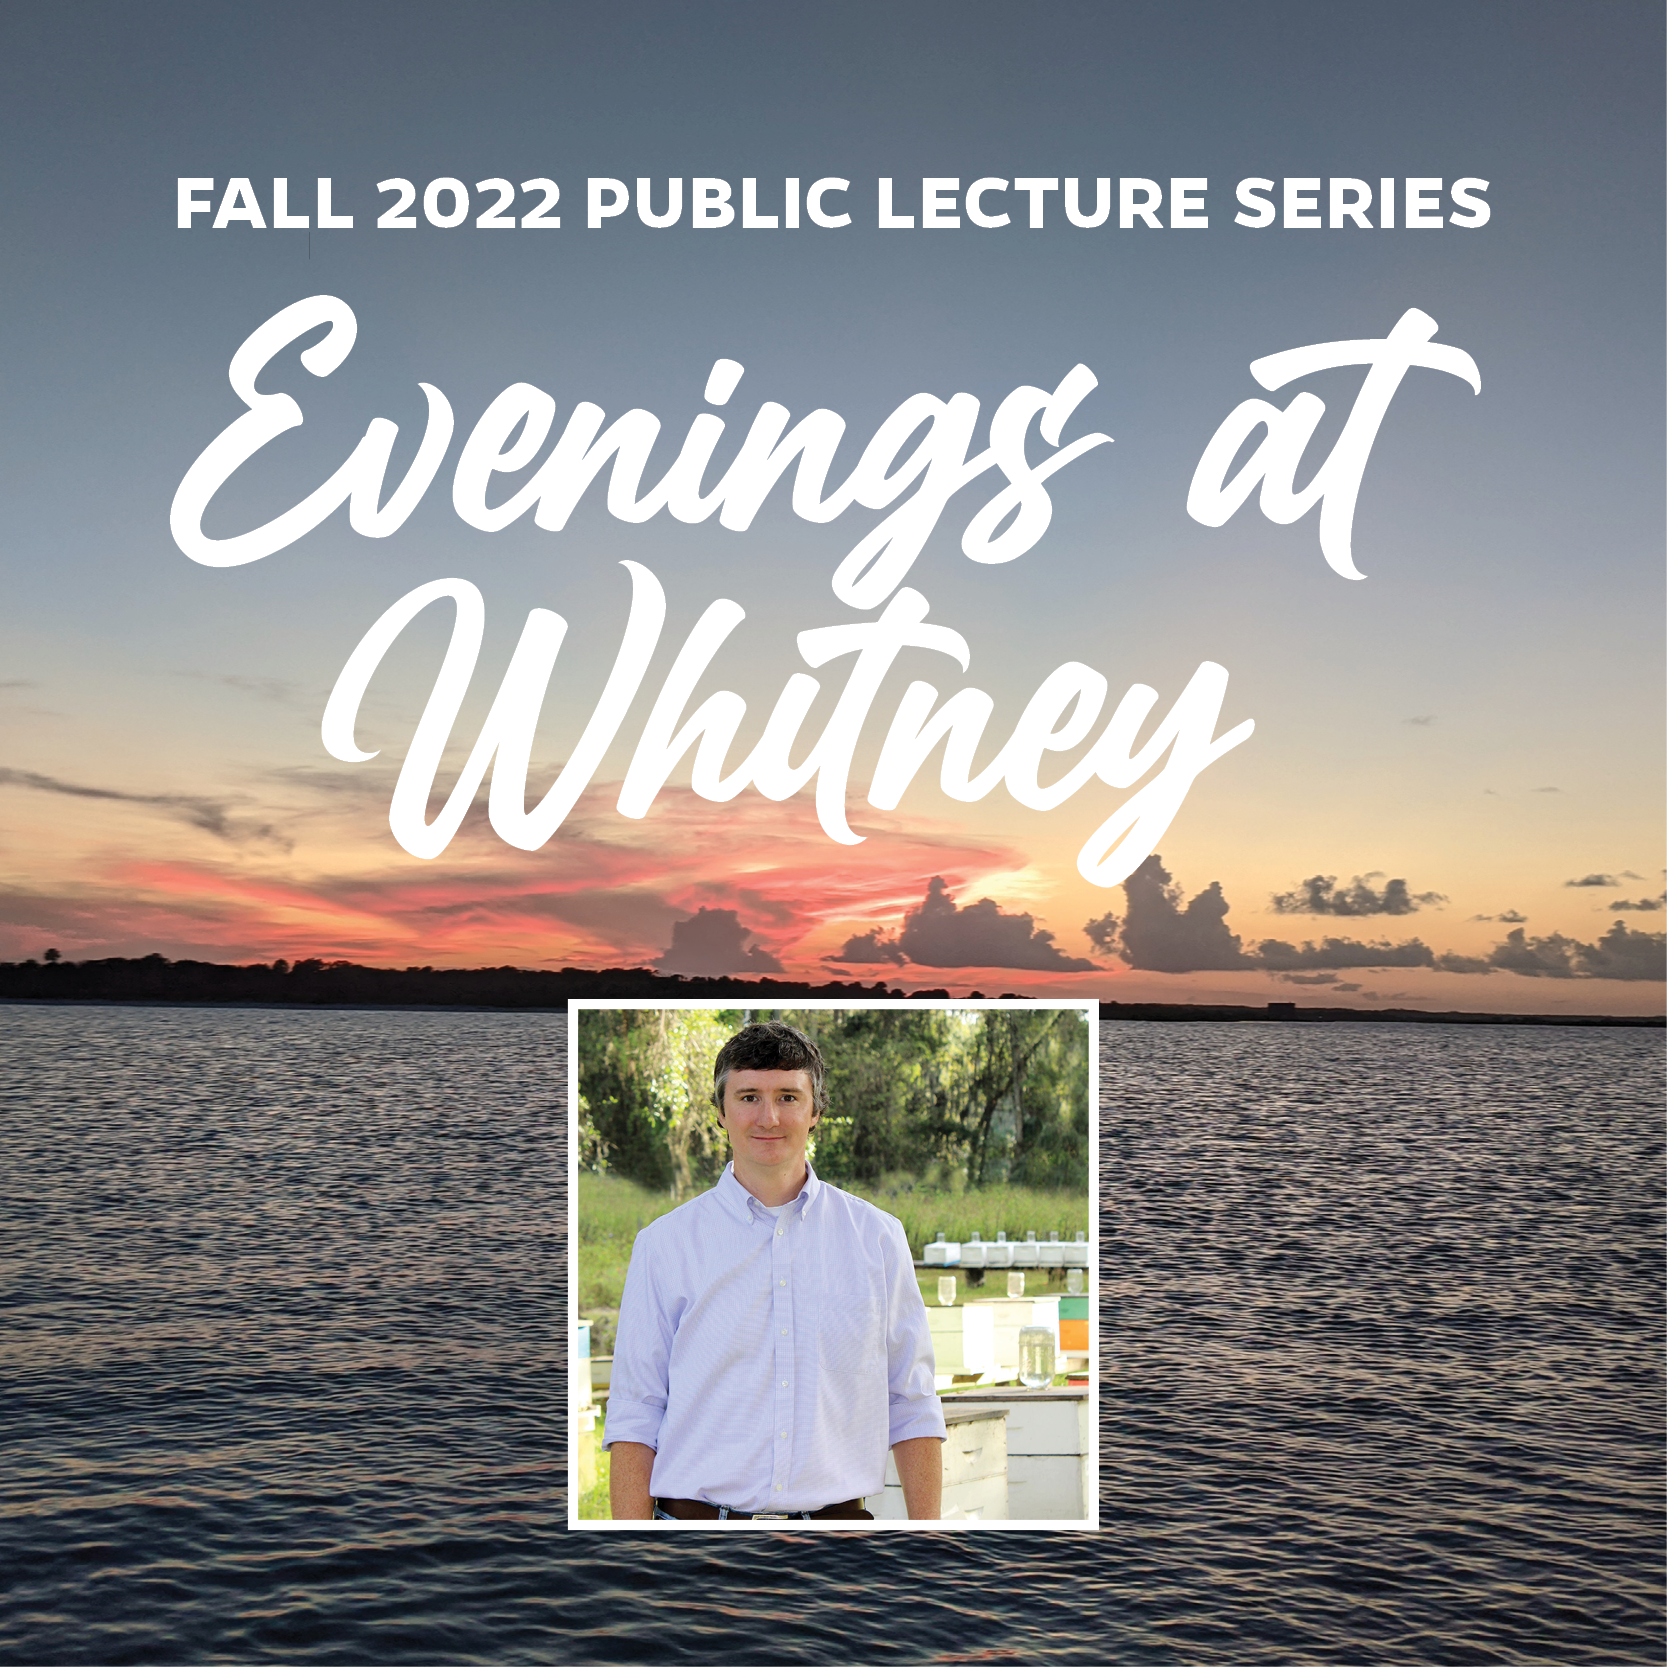 Evenings at Whitney November lecture graphic showing speaker photo